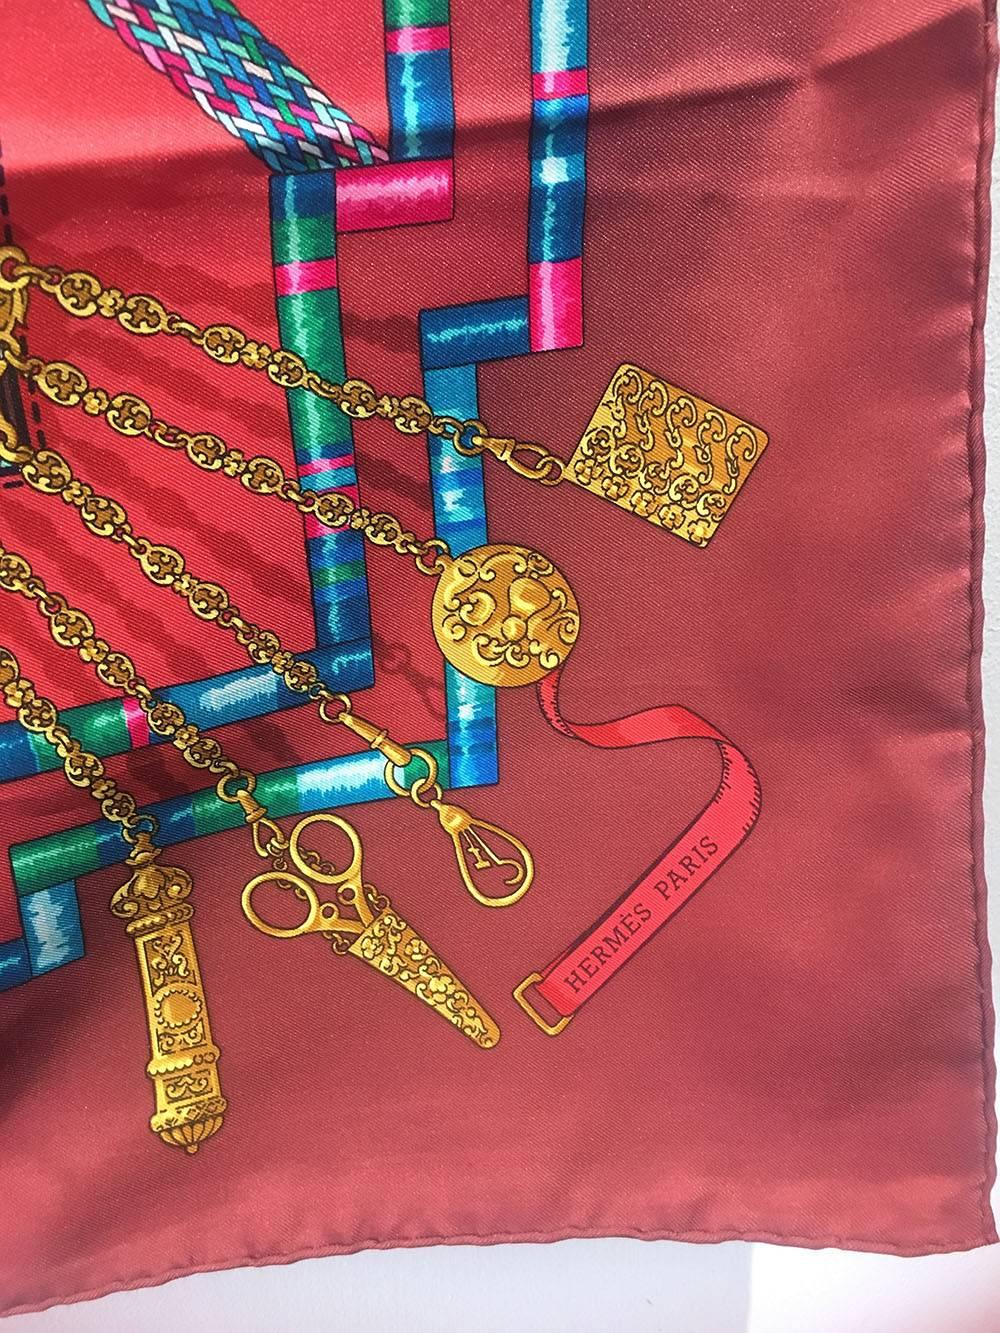 WONDERFUL Hermes Vintage Petit Main Silk Scarf in Dark Red c1980s in excellent condition.  Original silk screen design c1987 by Caty Latham features an arrangement of small bits and bobbles and trinkets of buttons, gold coins and chain and ribbons